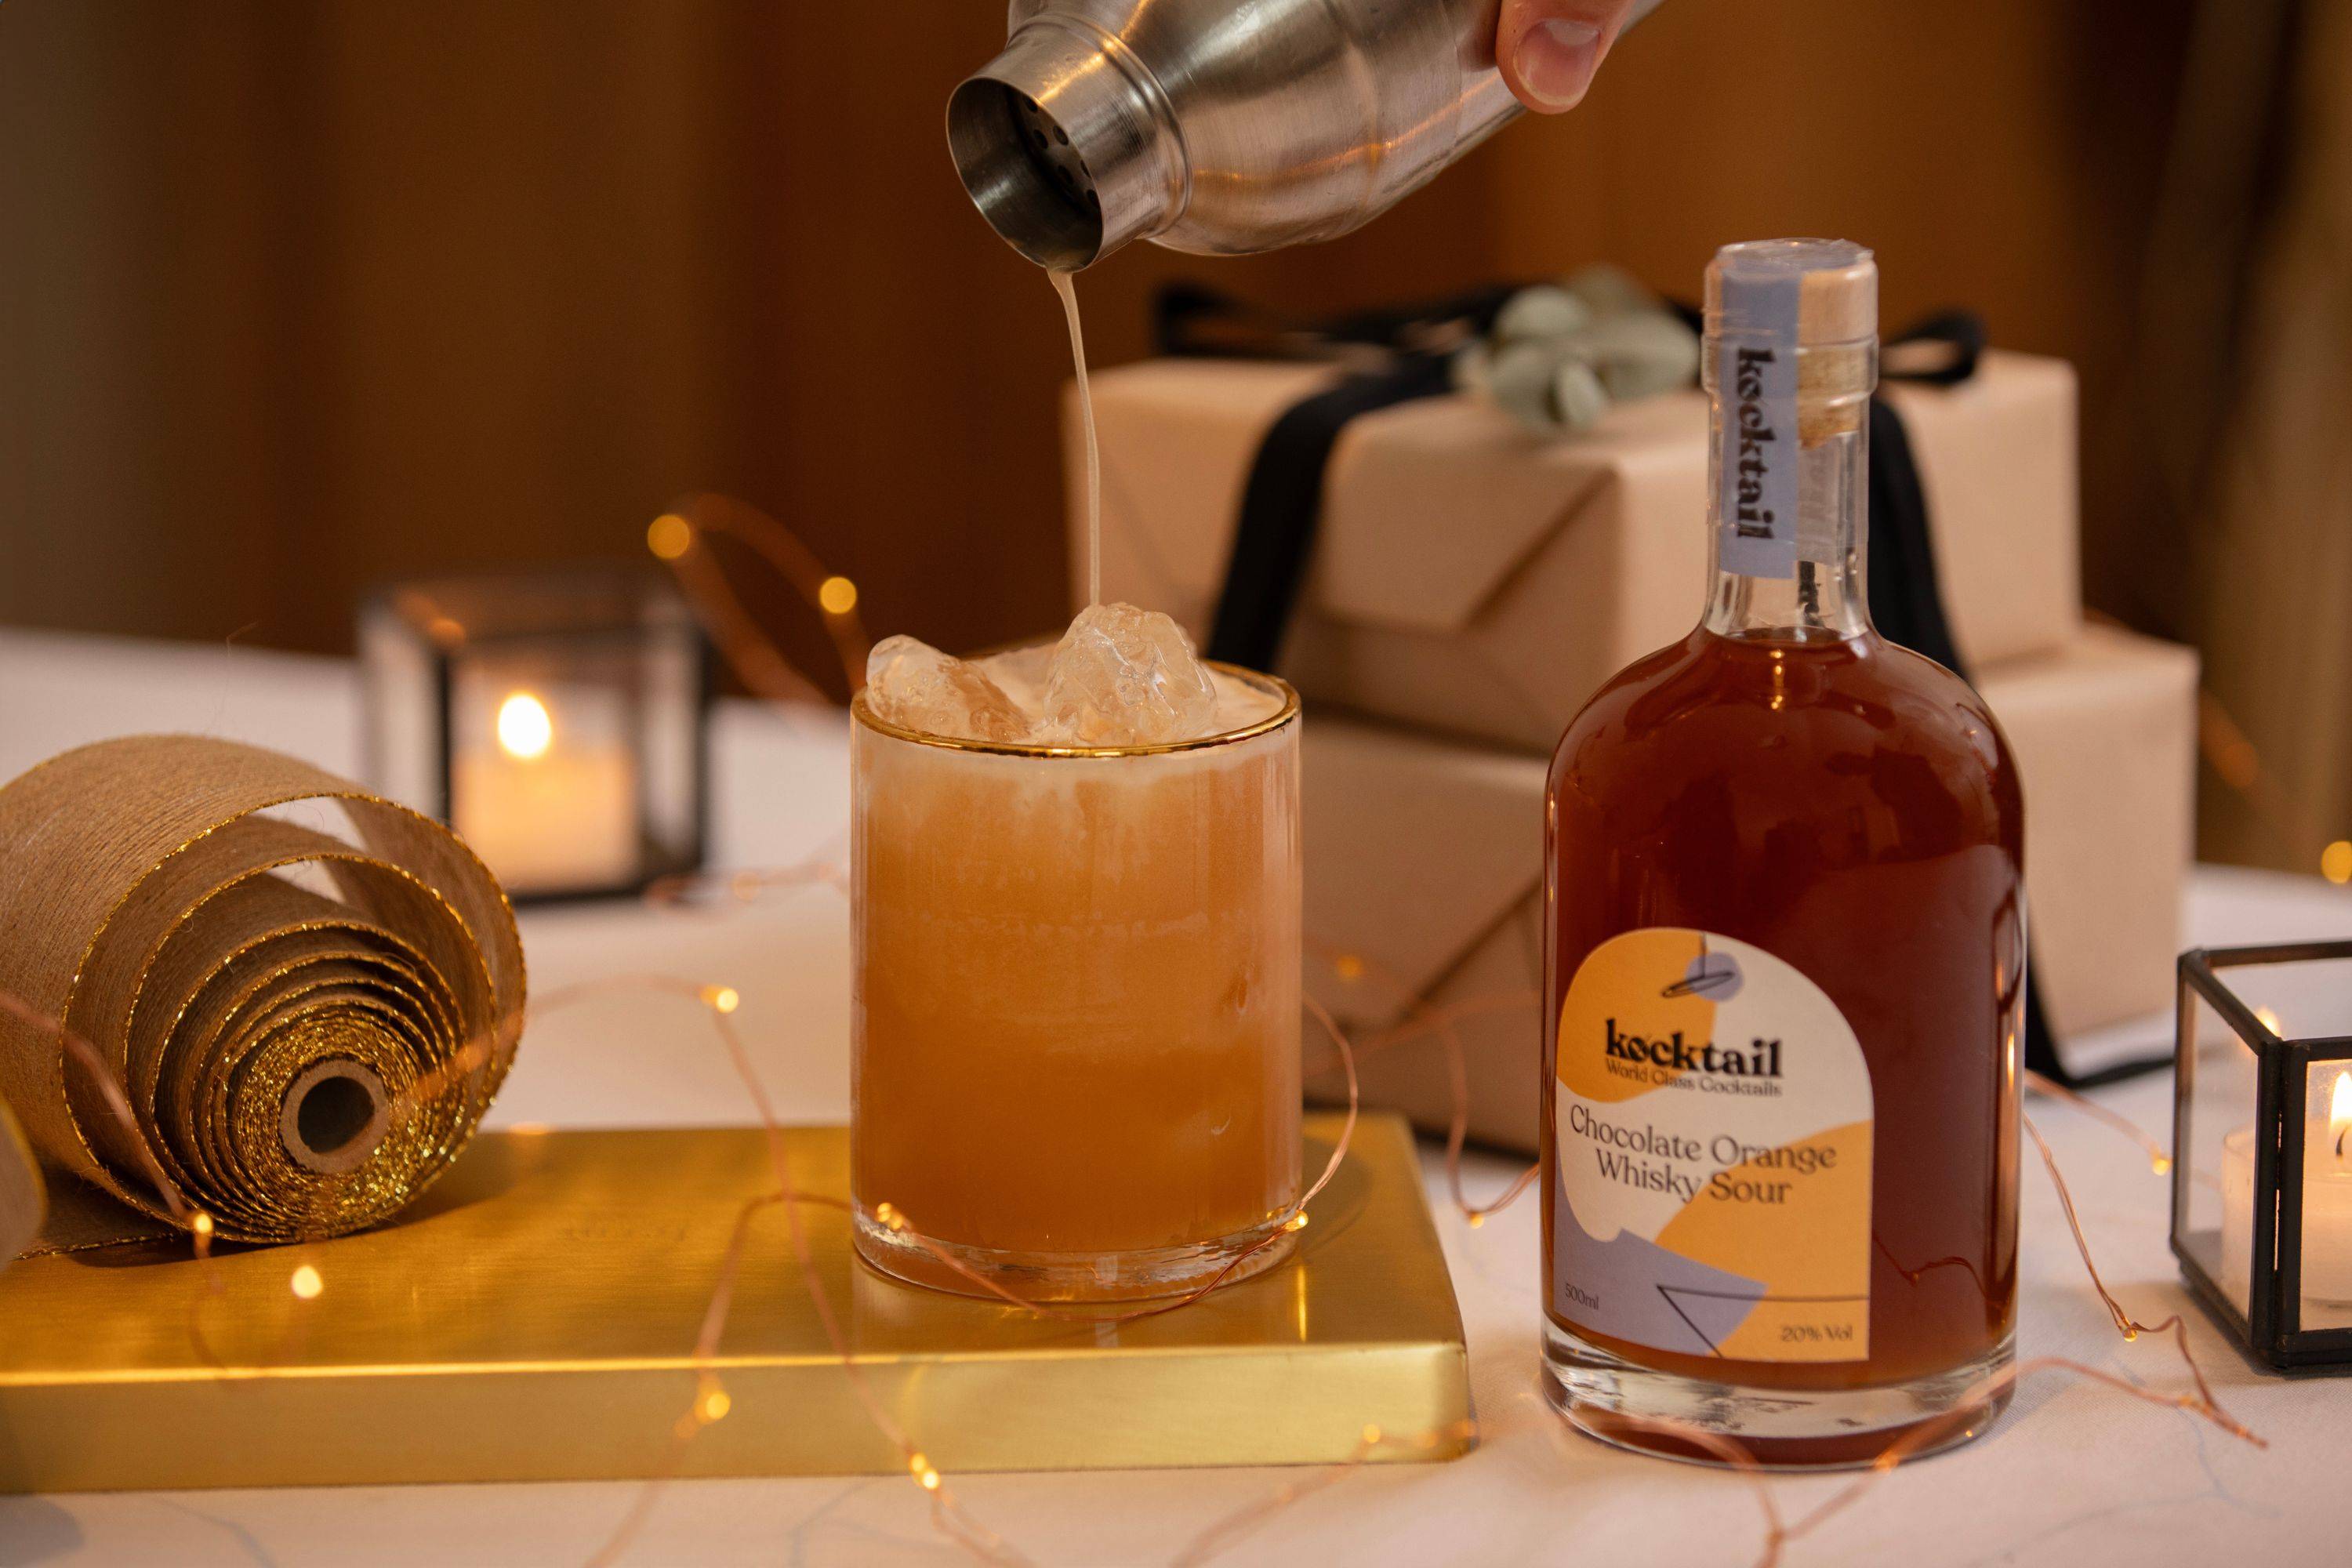 Chocolate orange whisky sour cocktail being poured into a glass on dining table 